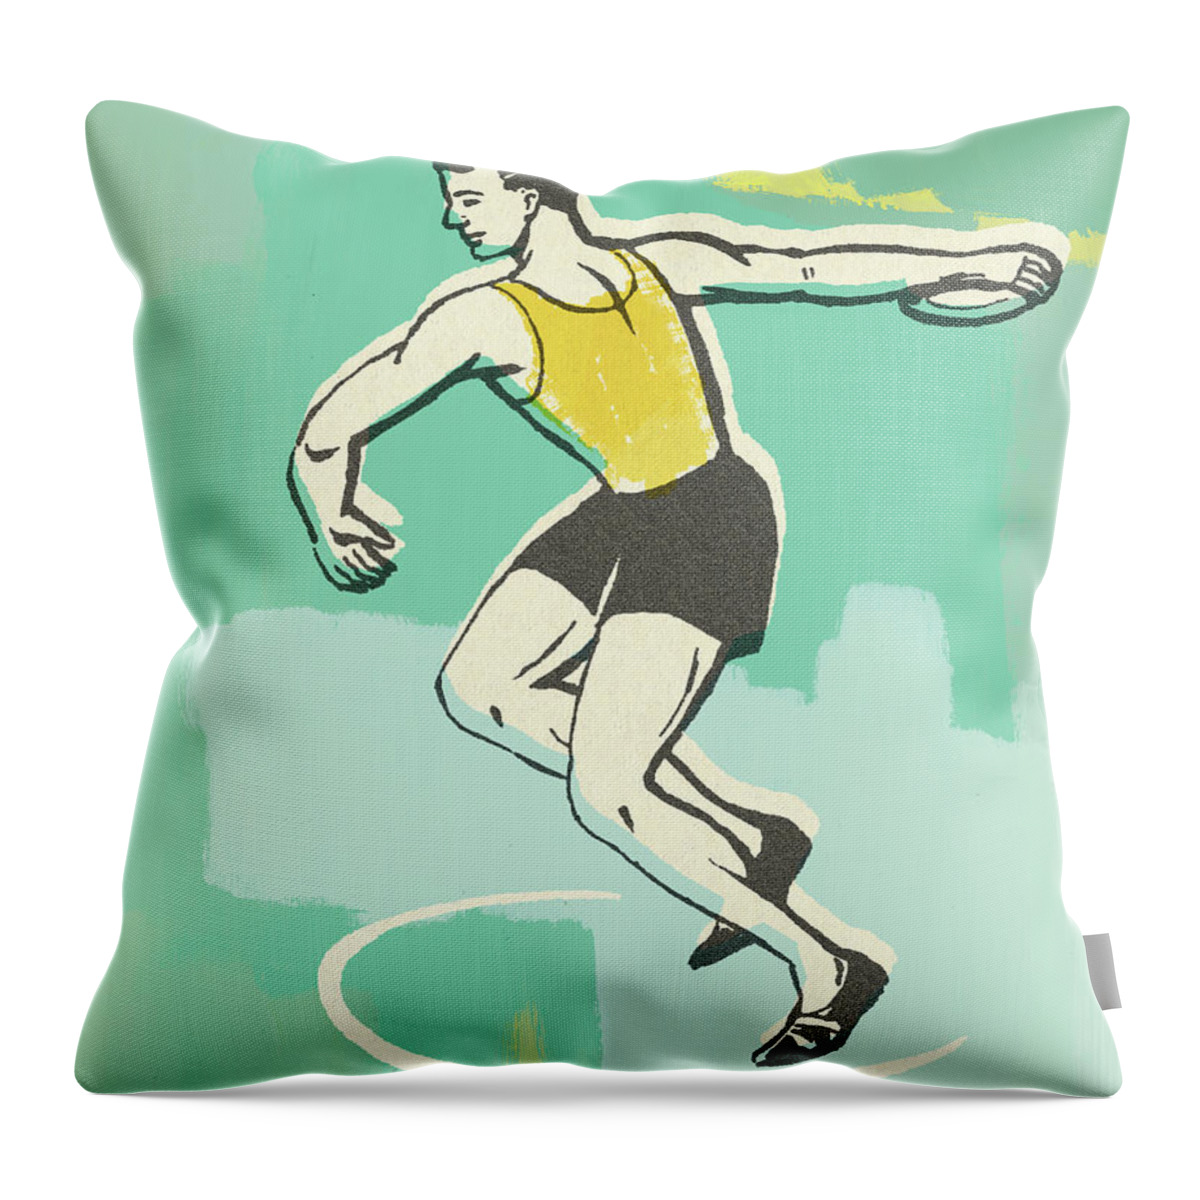 Adult Throw Pillow featuring the drawing Discus Throw by CSA Images